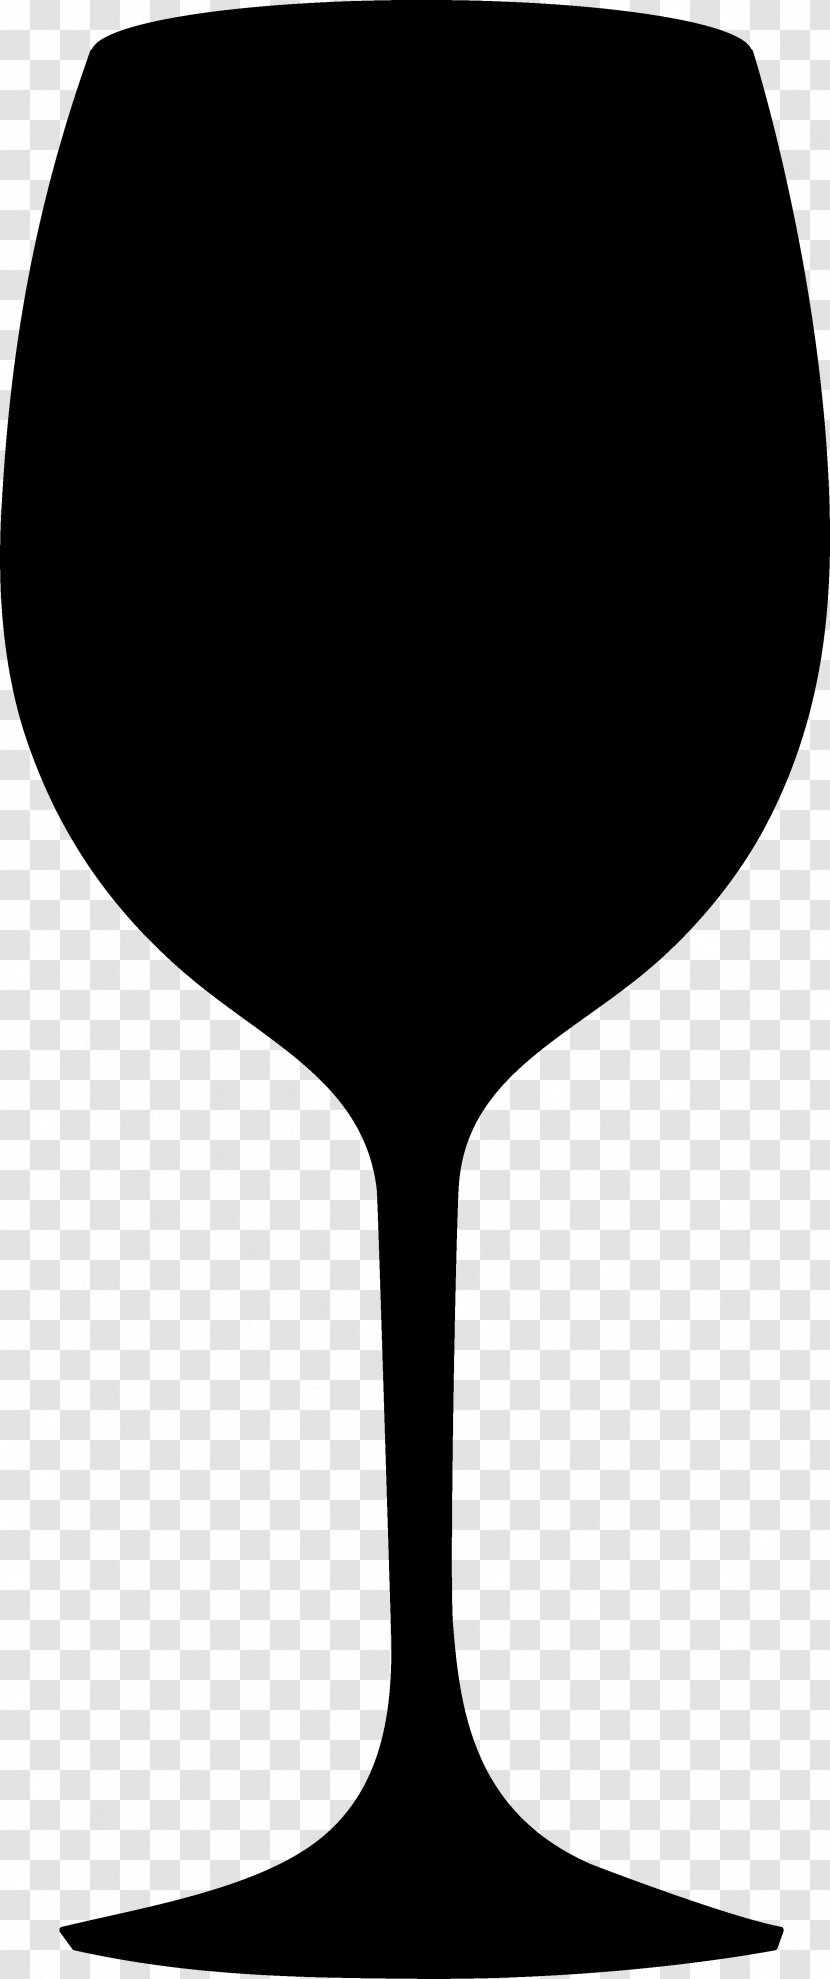 Wine Glass Champagne Illustration - Ping Pong Transparent PNG